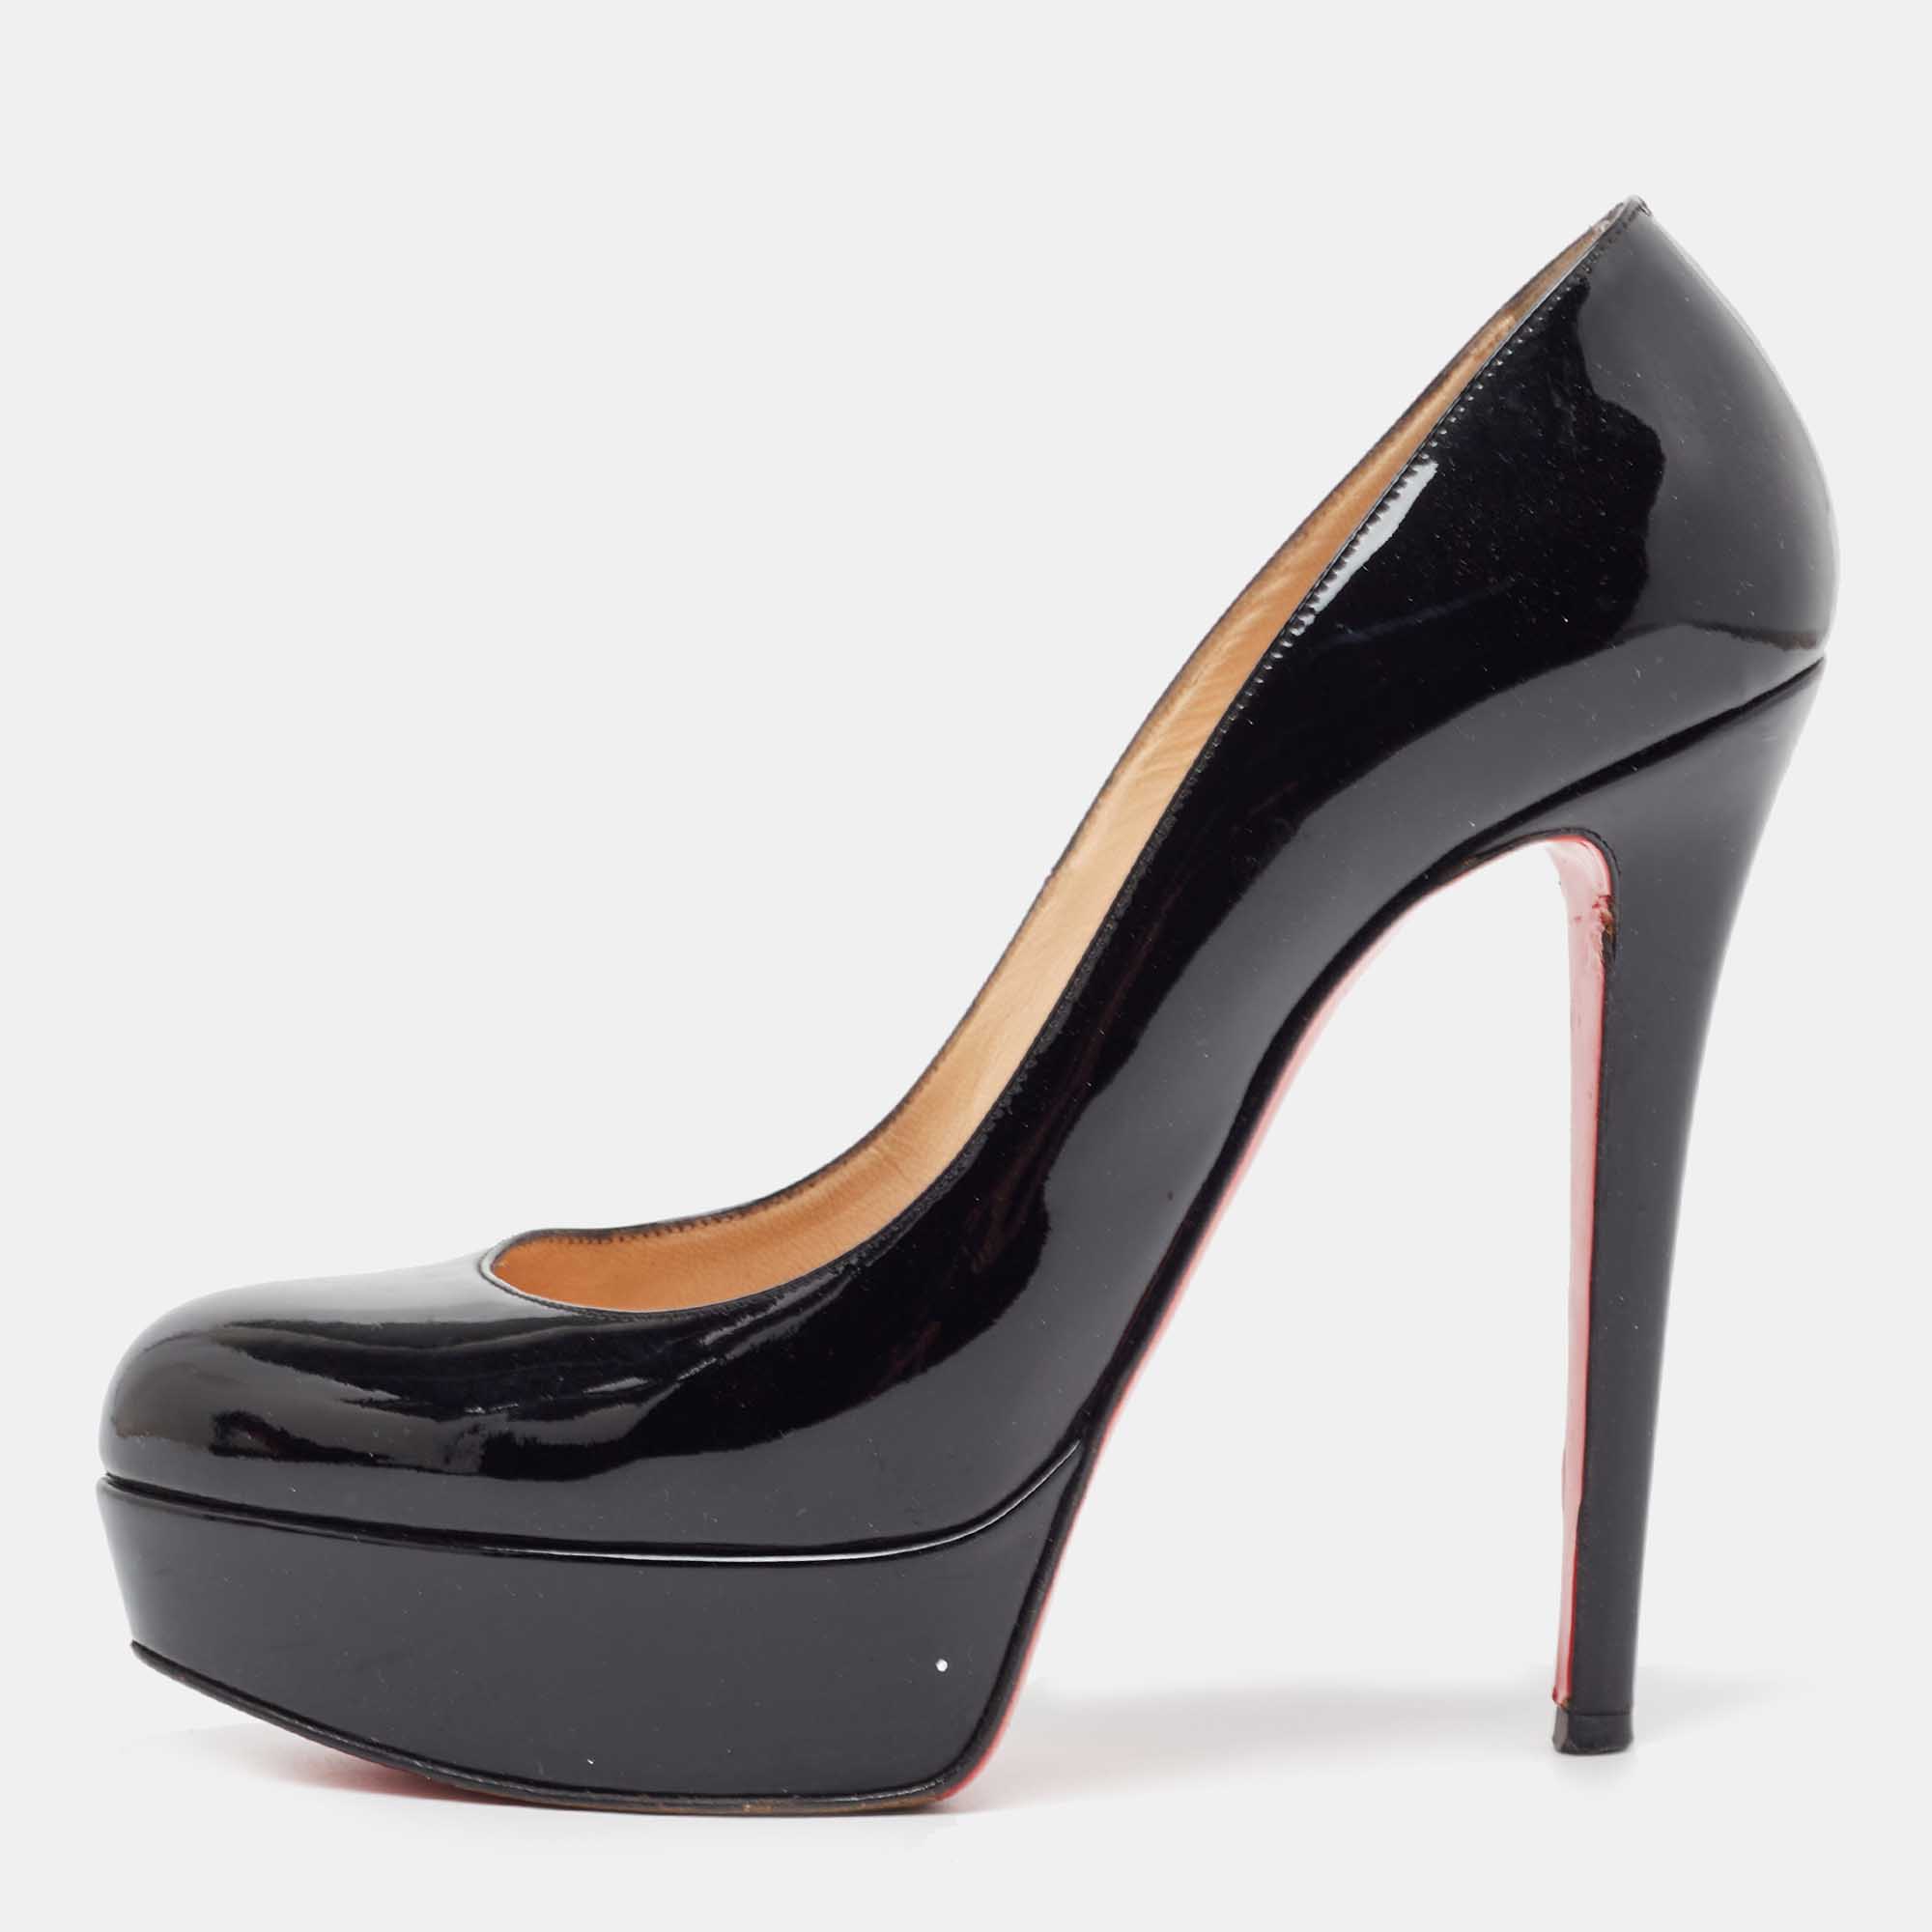 Pre-owned Christian Louboutin Black Patent Leather Bianca Pumps Size 37.5